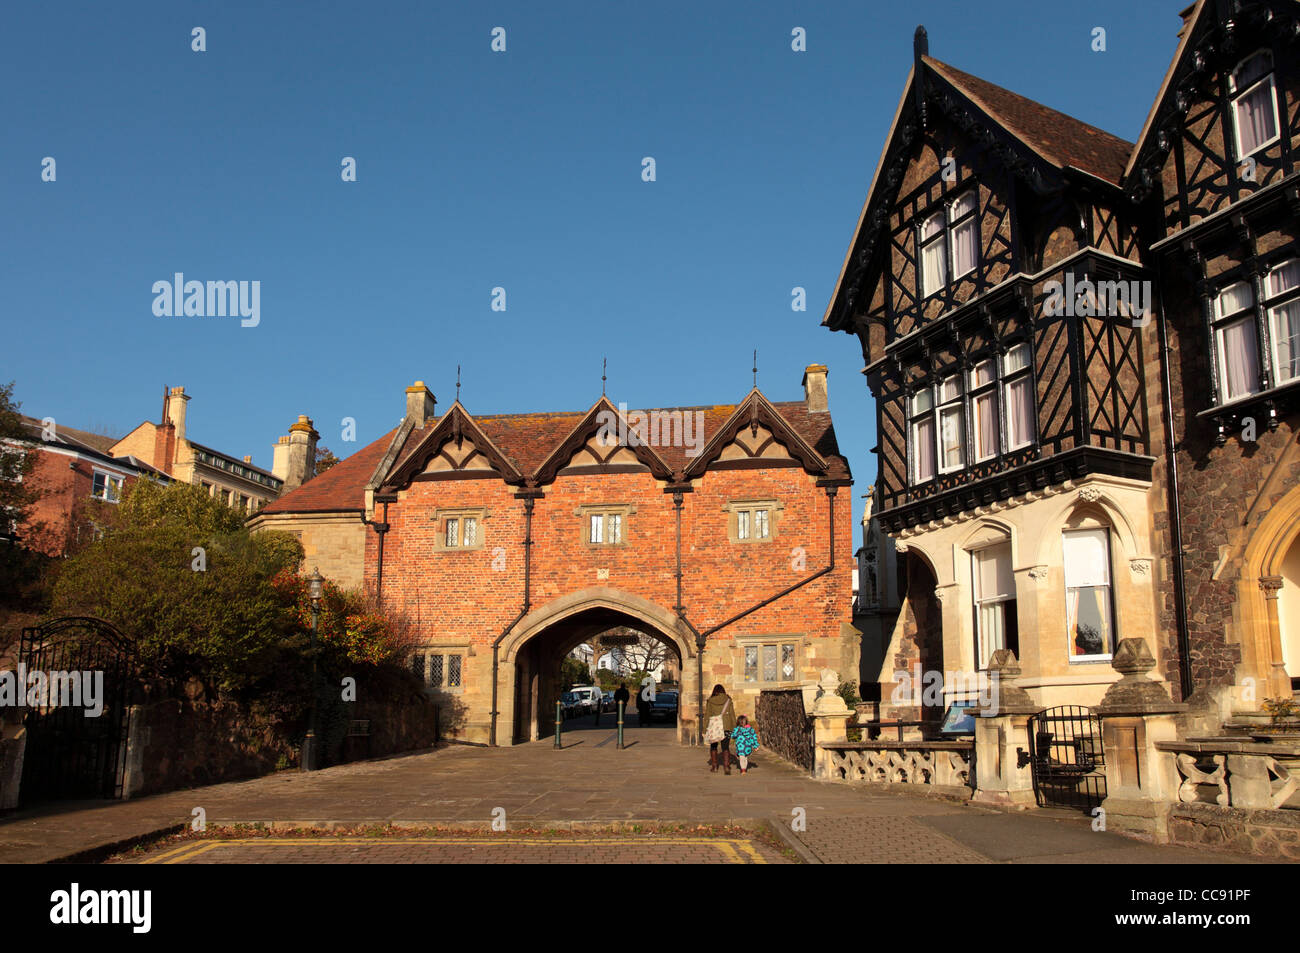 View of the Priory Gate and Abbey Hotel, Great Malvern, Worcestershire UK Stock Photo